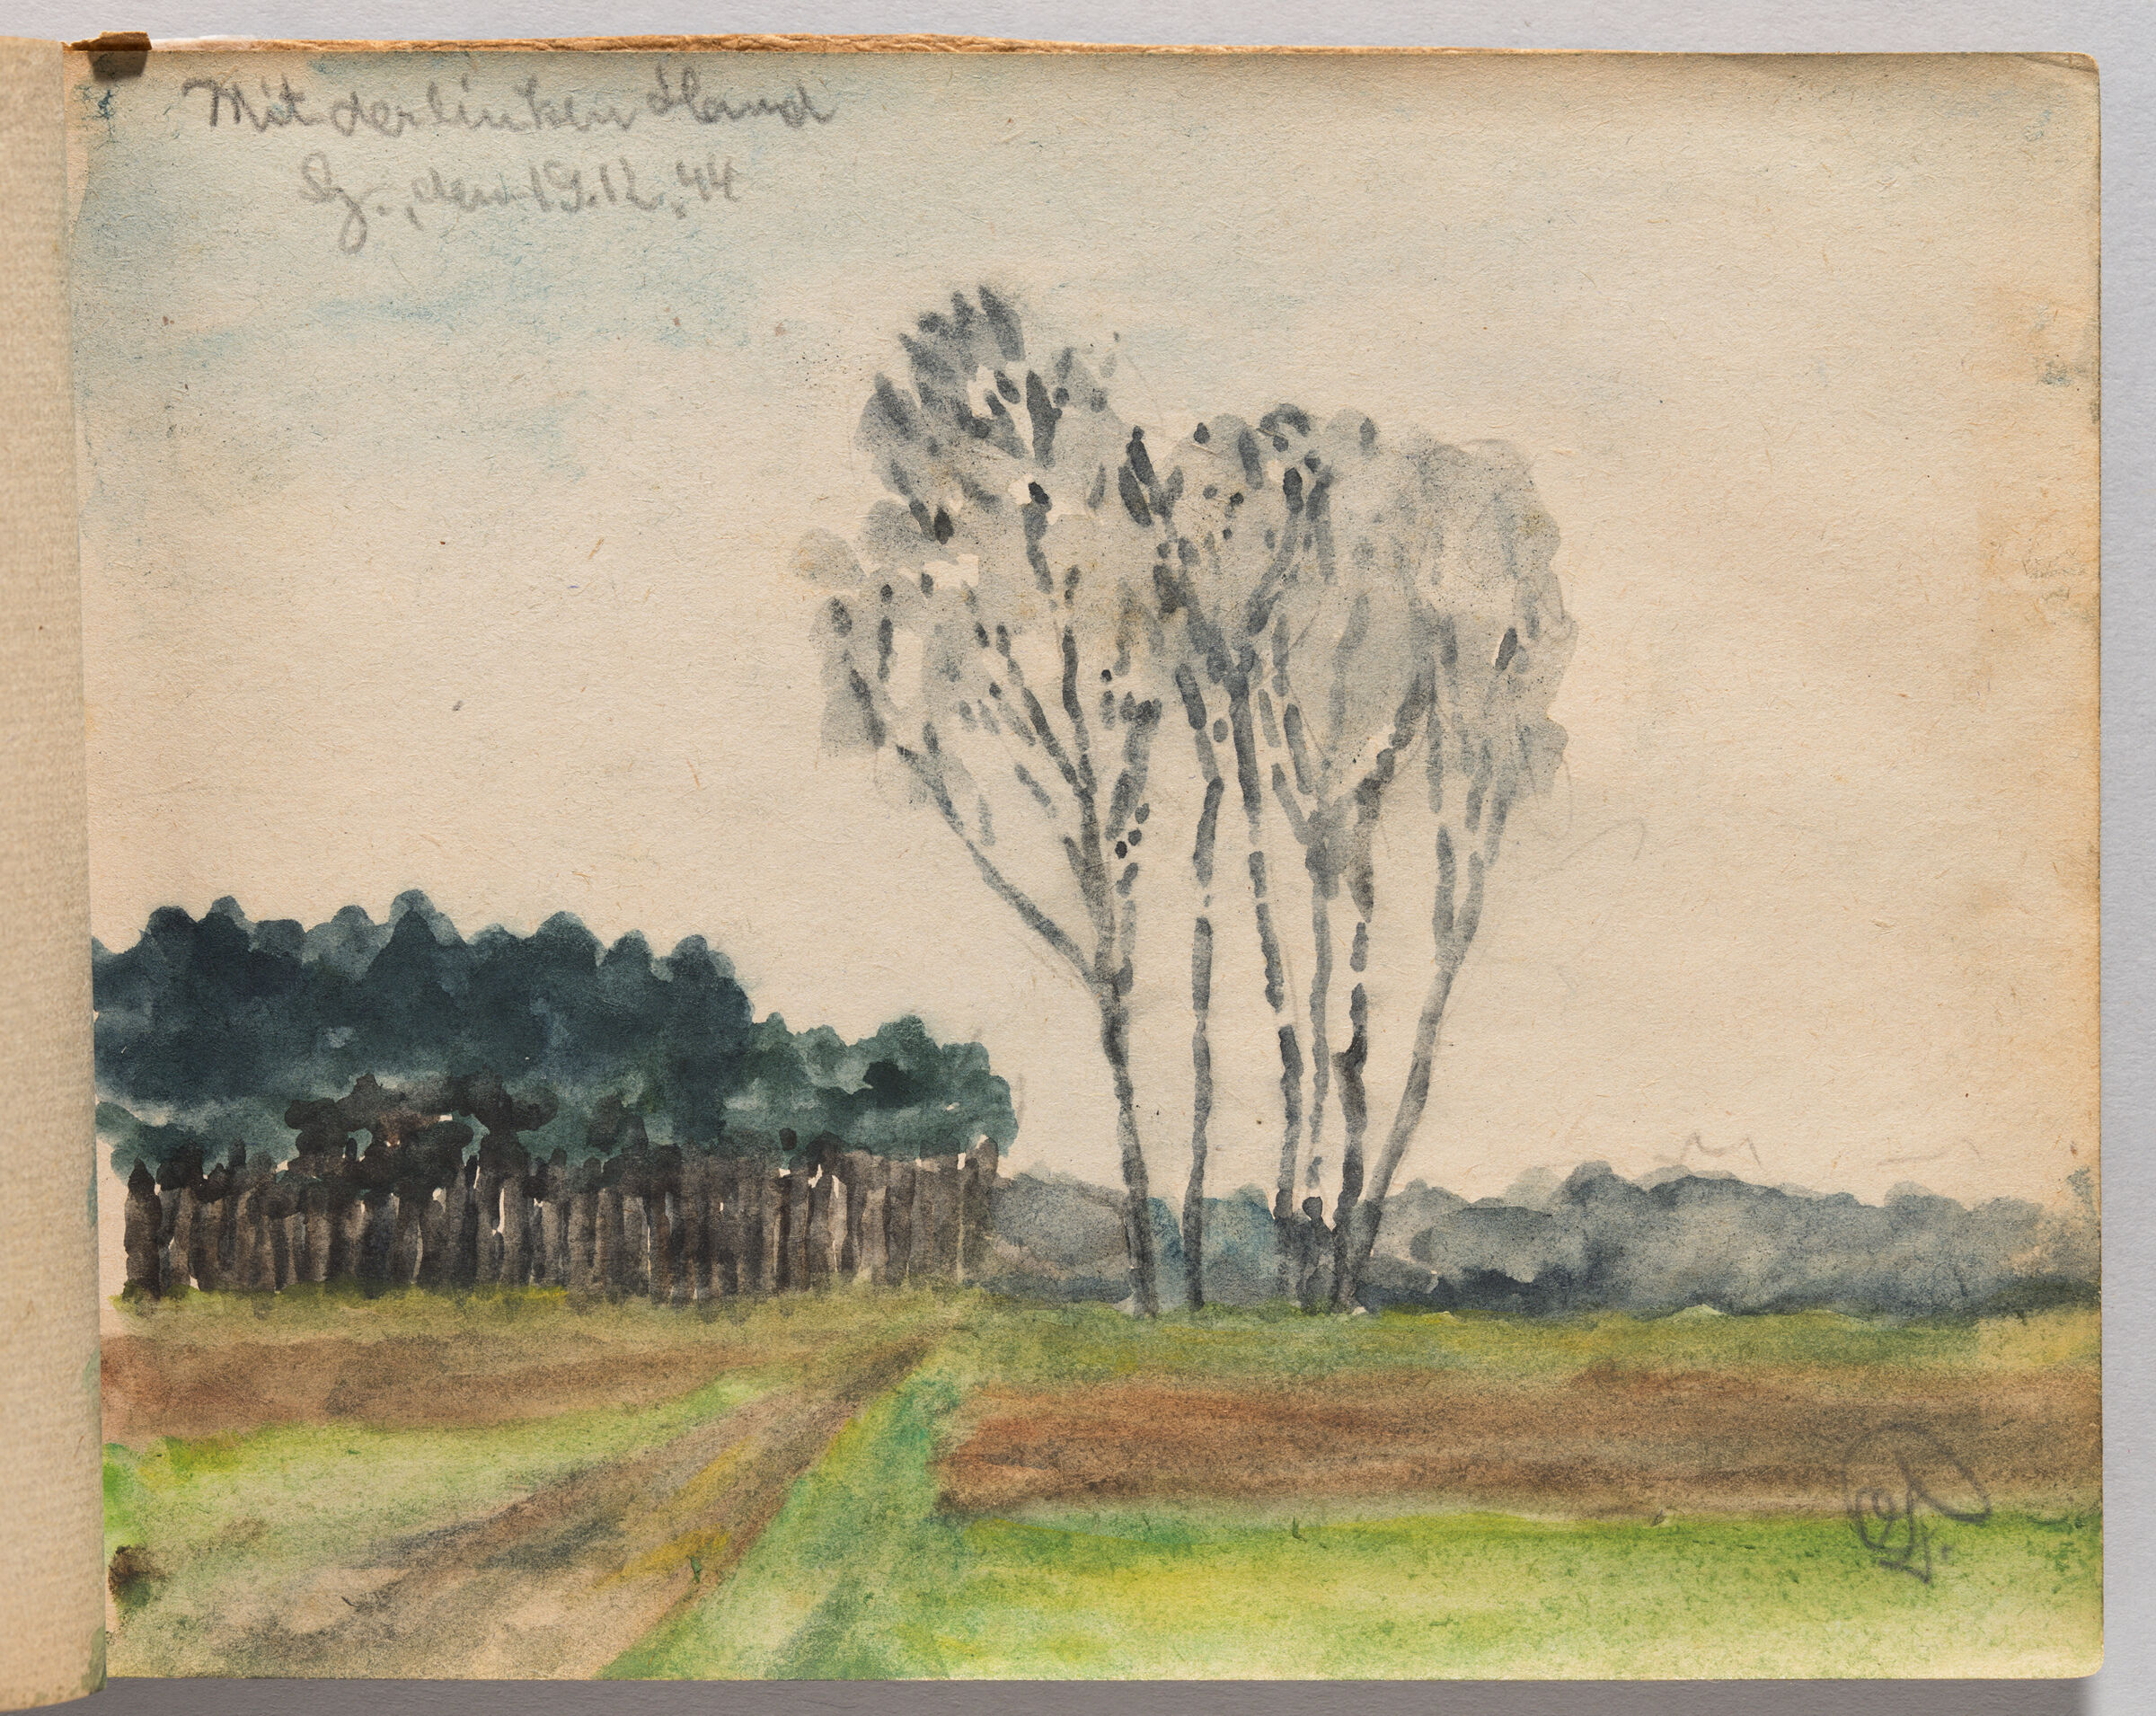 Untitled (Blank, Left Page); Untitled (Landscape Painted With Left Hand, Right Page)